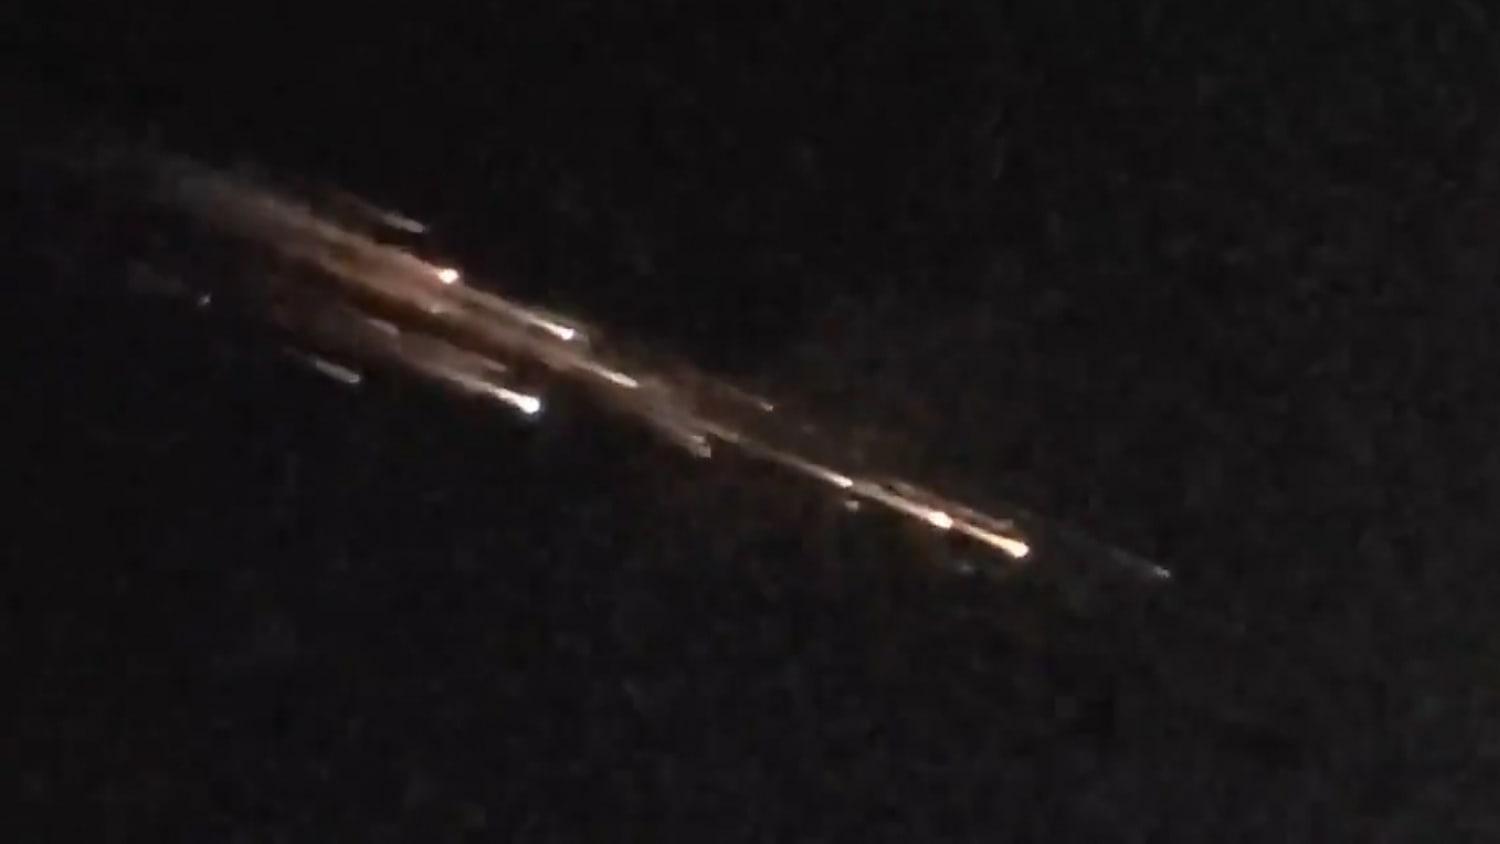 Likely rocket debris lights up skies over the Pacific Northwest